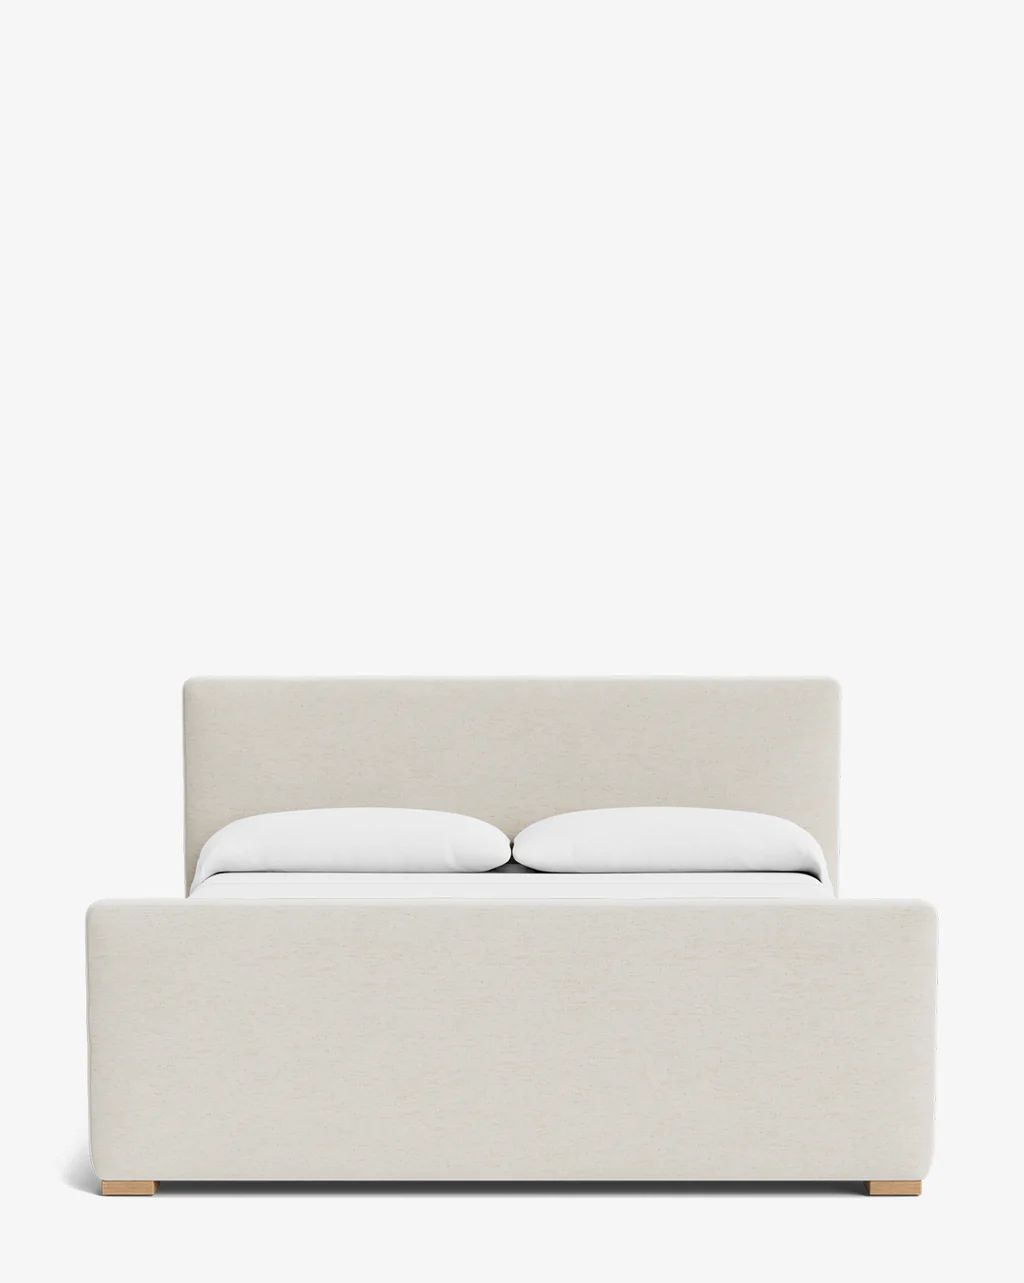 Faris Bed | McGee & Co.